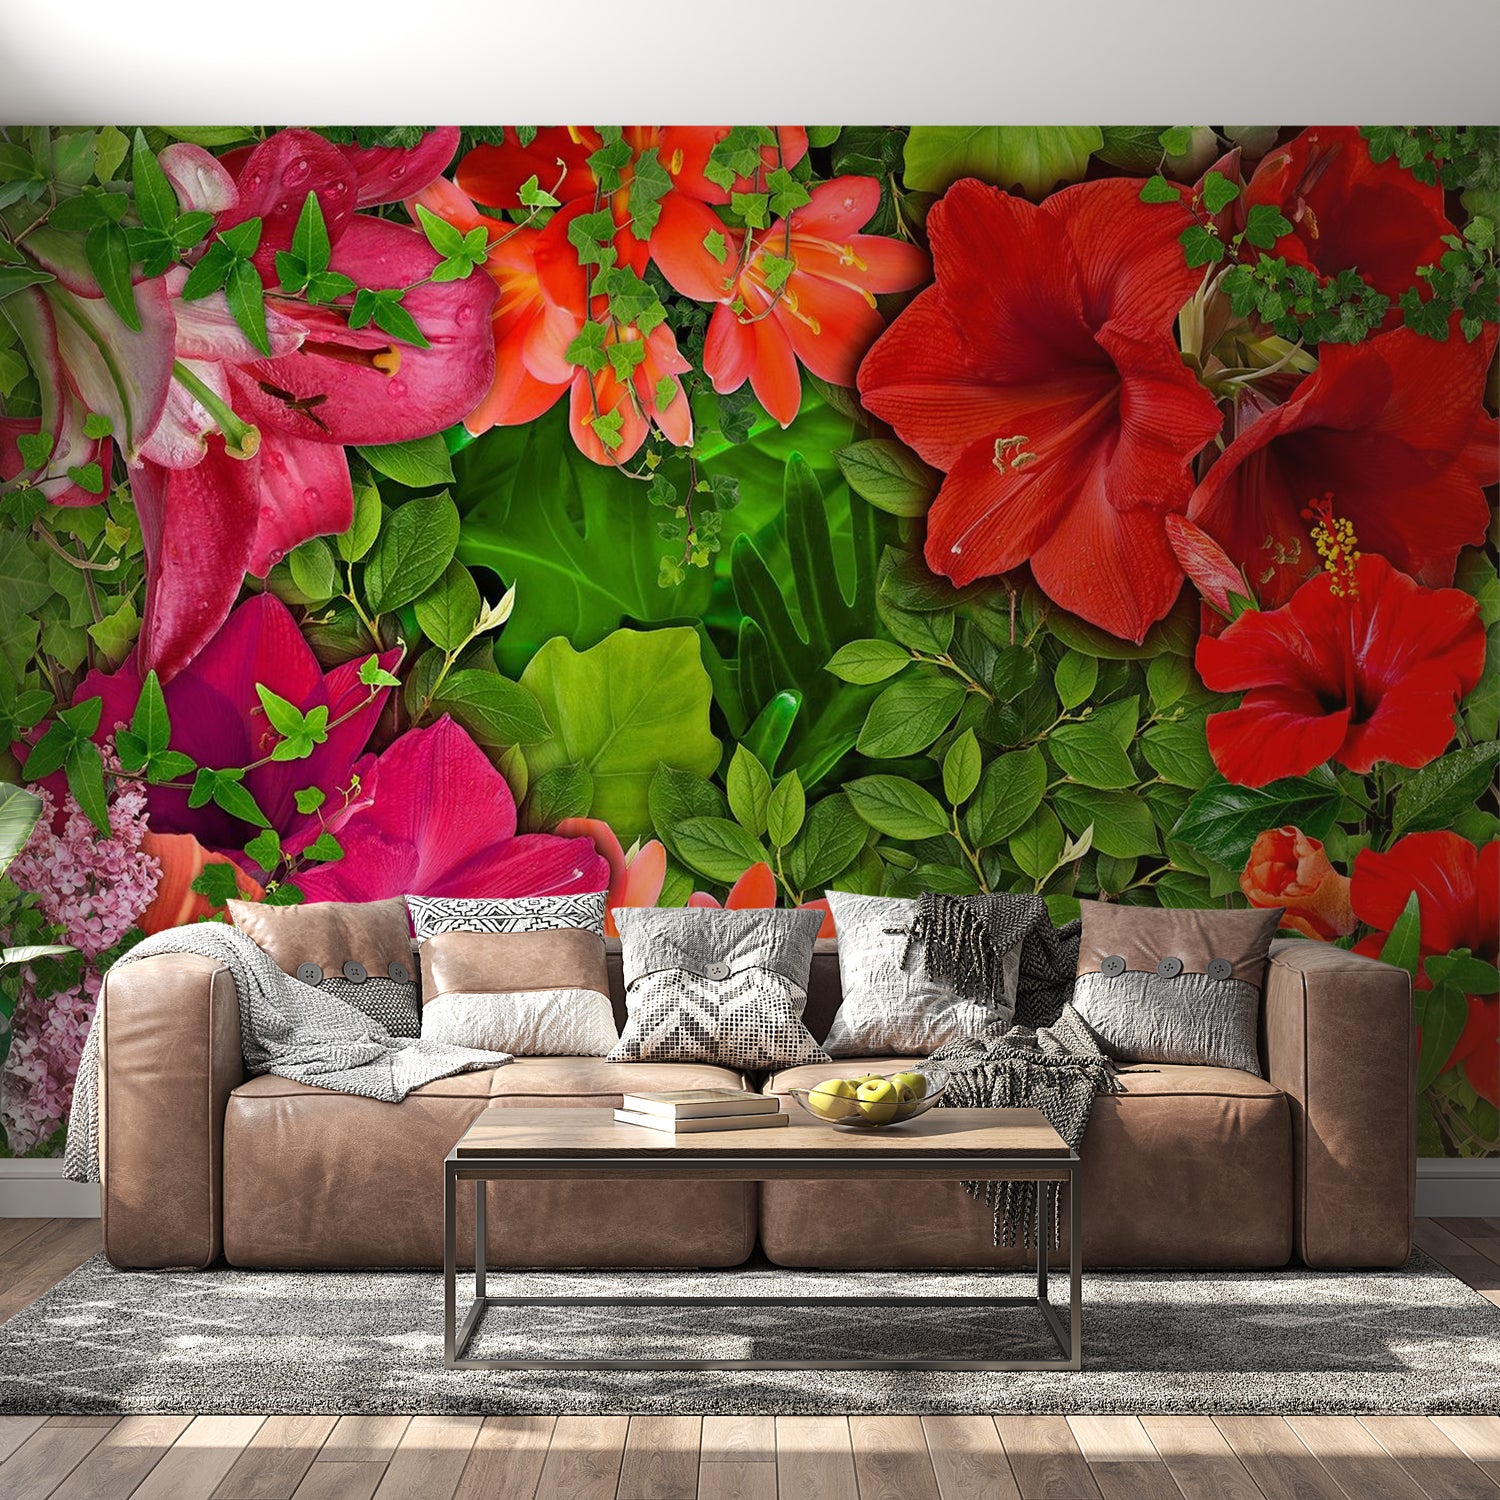 Peel & Stick Floral Wall Mural - Bright Flowers And Leaves - Removable Wall Decals